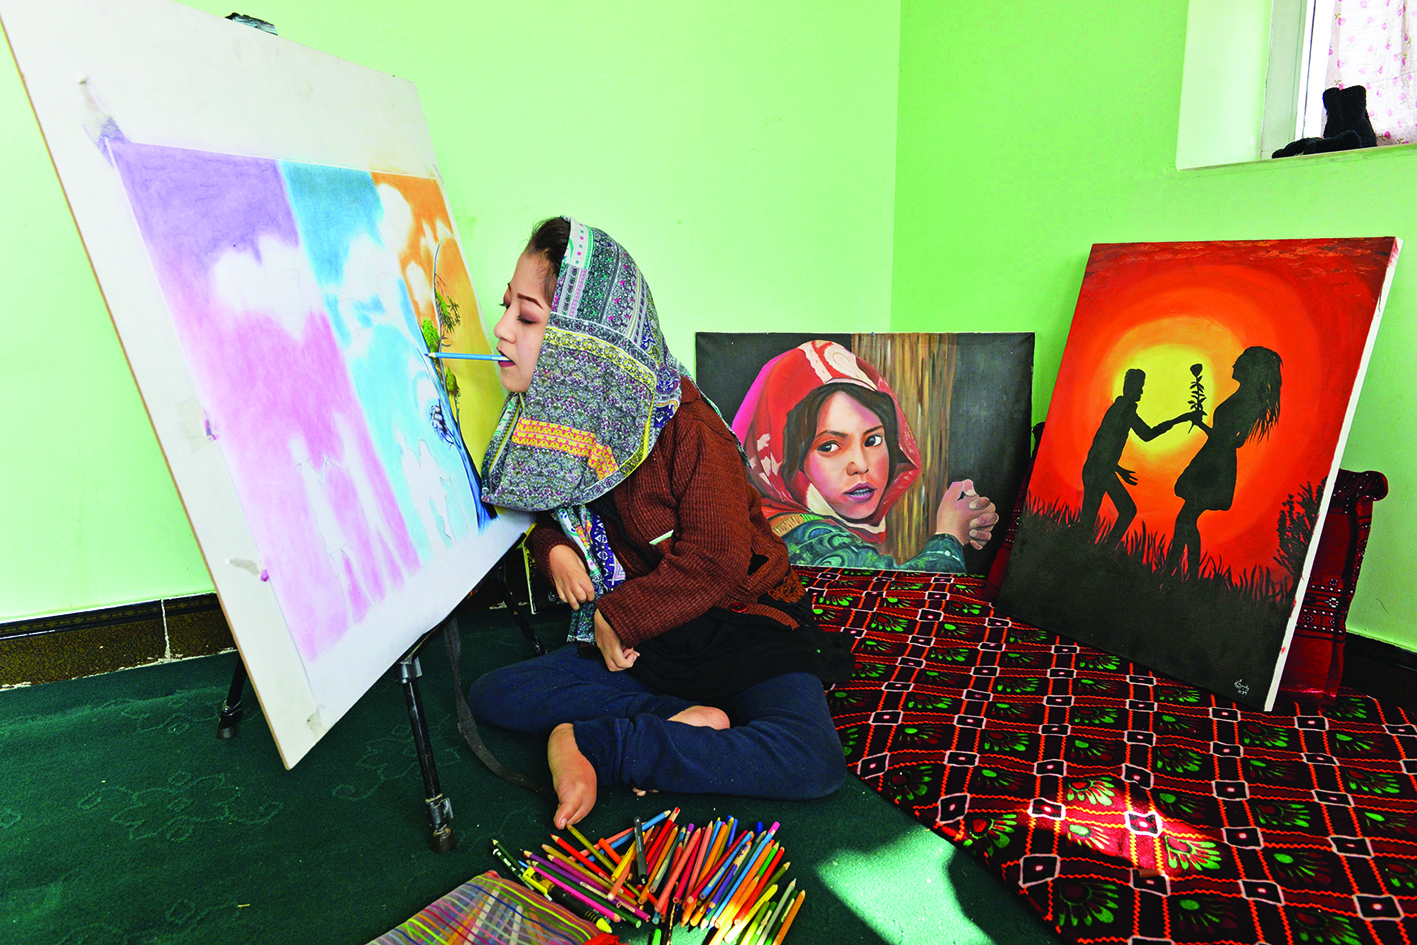 This photo taken on December 5, 2019 shows 19-year-old Afghan artist Robaba Mohammadi painting in her studio in Kabul. - Unable to use her hands, arms, or legs, Afghan artist Robaba Mohammadi has defied unlikely odds in a country that routinely discriminates against women and disabled people. Denied access to school, as a child she taught herself to paint by holding a brush in her mouth, clenching it between her teeth to create elaborate and colourful portraits. (Photo by NOORULLAH SHIRZADA / AFP) / TO GO WITH Afghanistan-disabilities-woman-social,FOCUS by Mushtaq MOJADDIDI